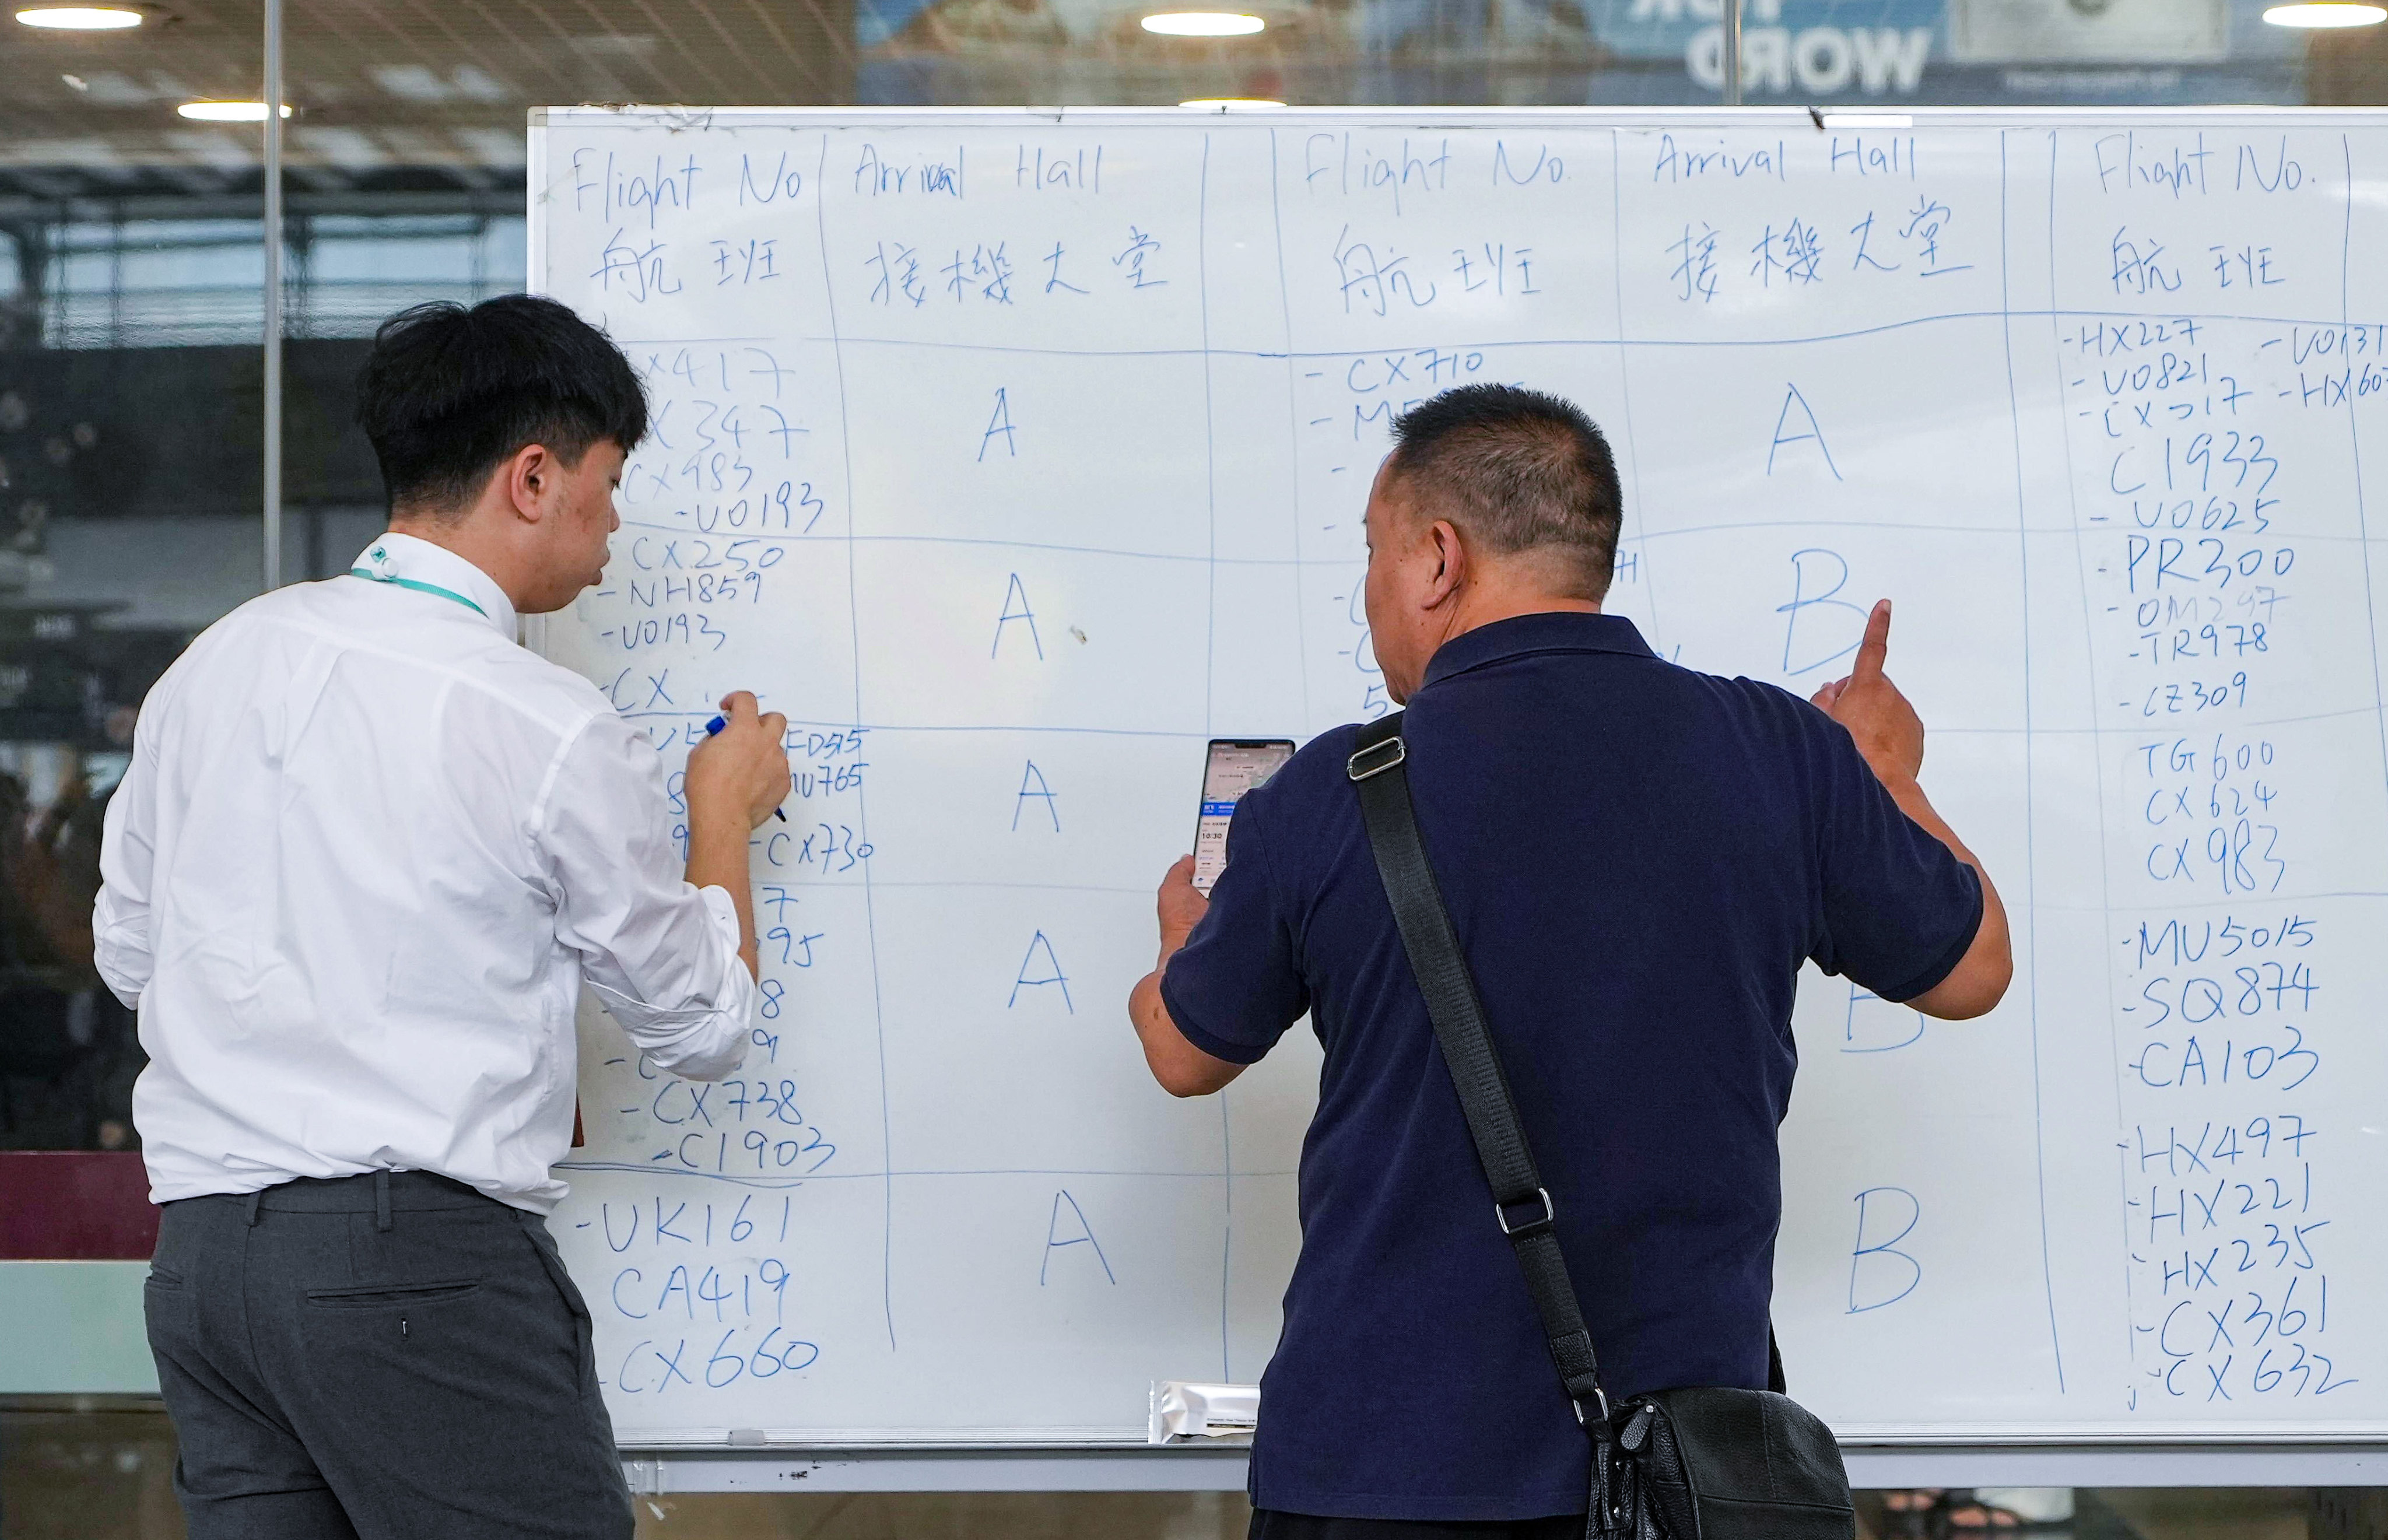 An airport staff member updates information on a whiteboard after a passenger information display screen failure on Sunday. Photo: Elson Li